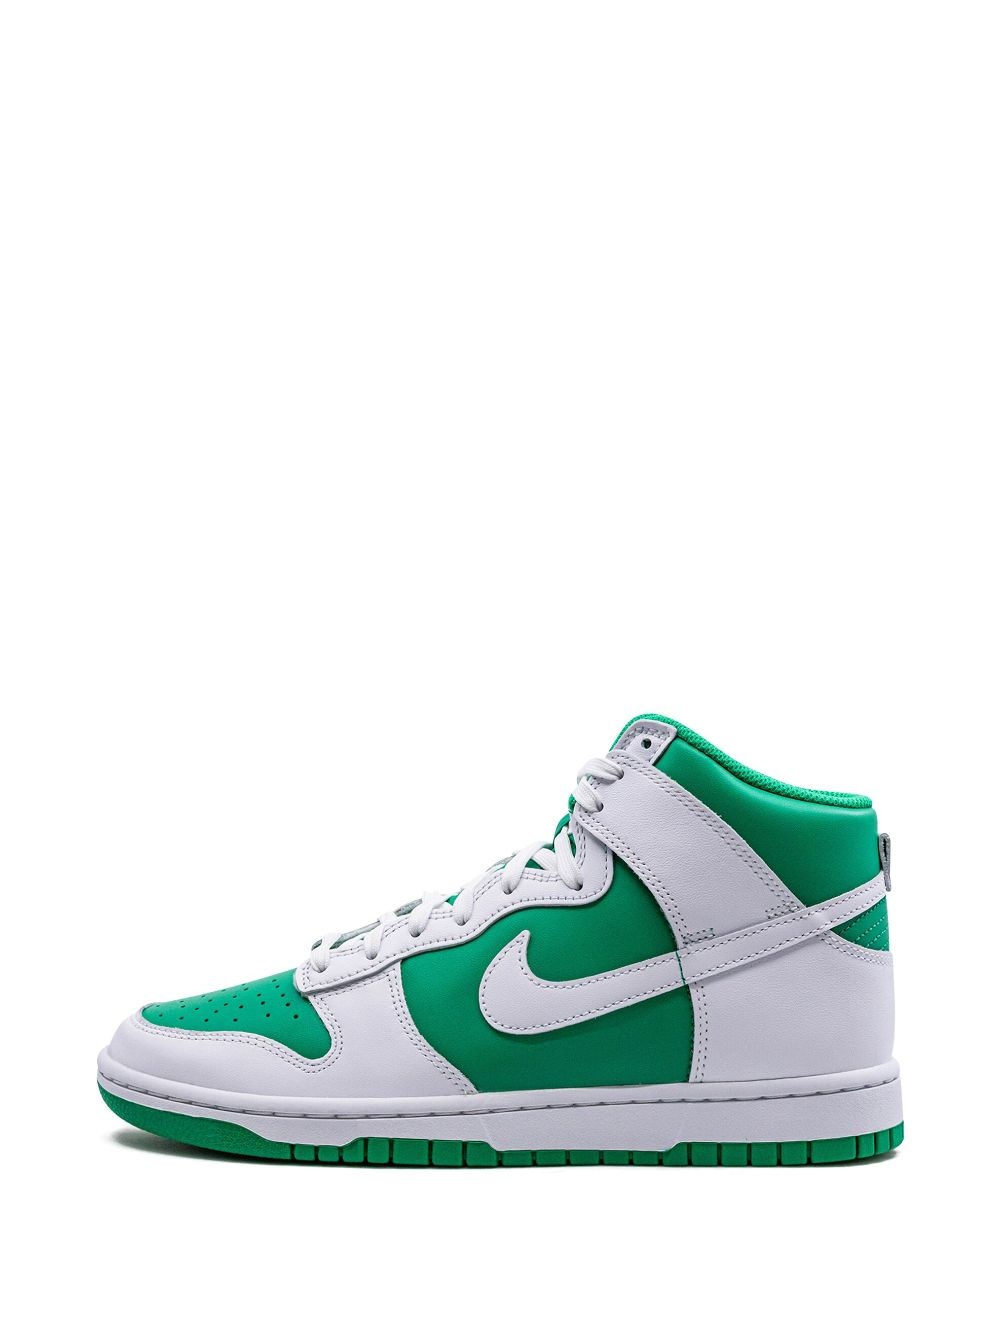 Dunk High "Pine Green White" sneakers - 5